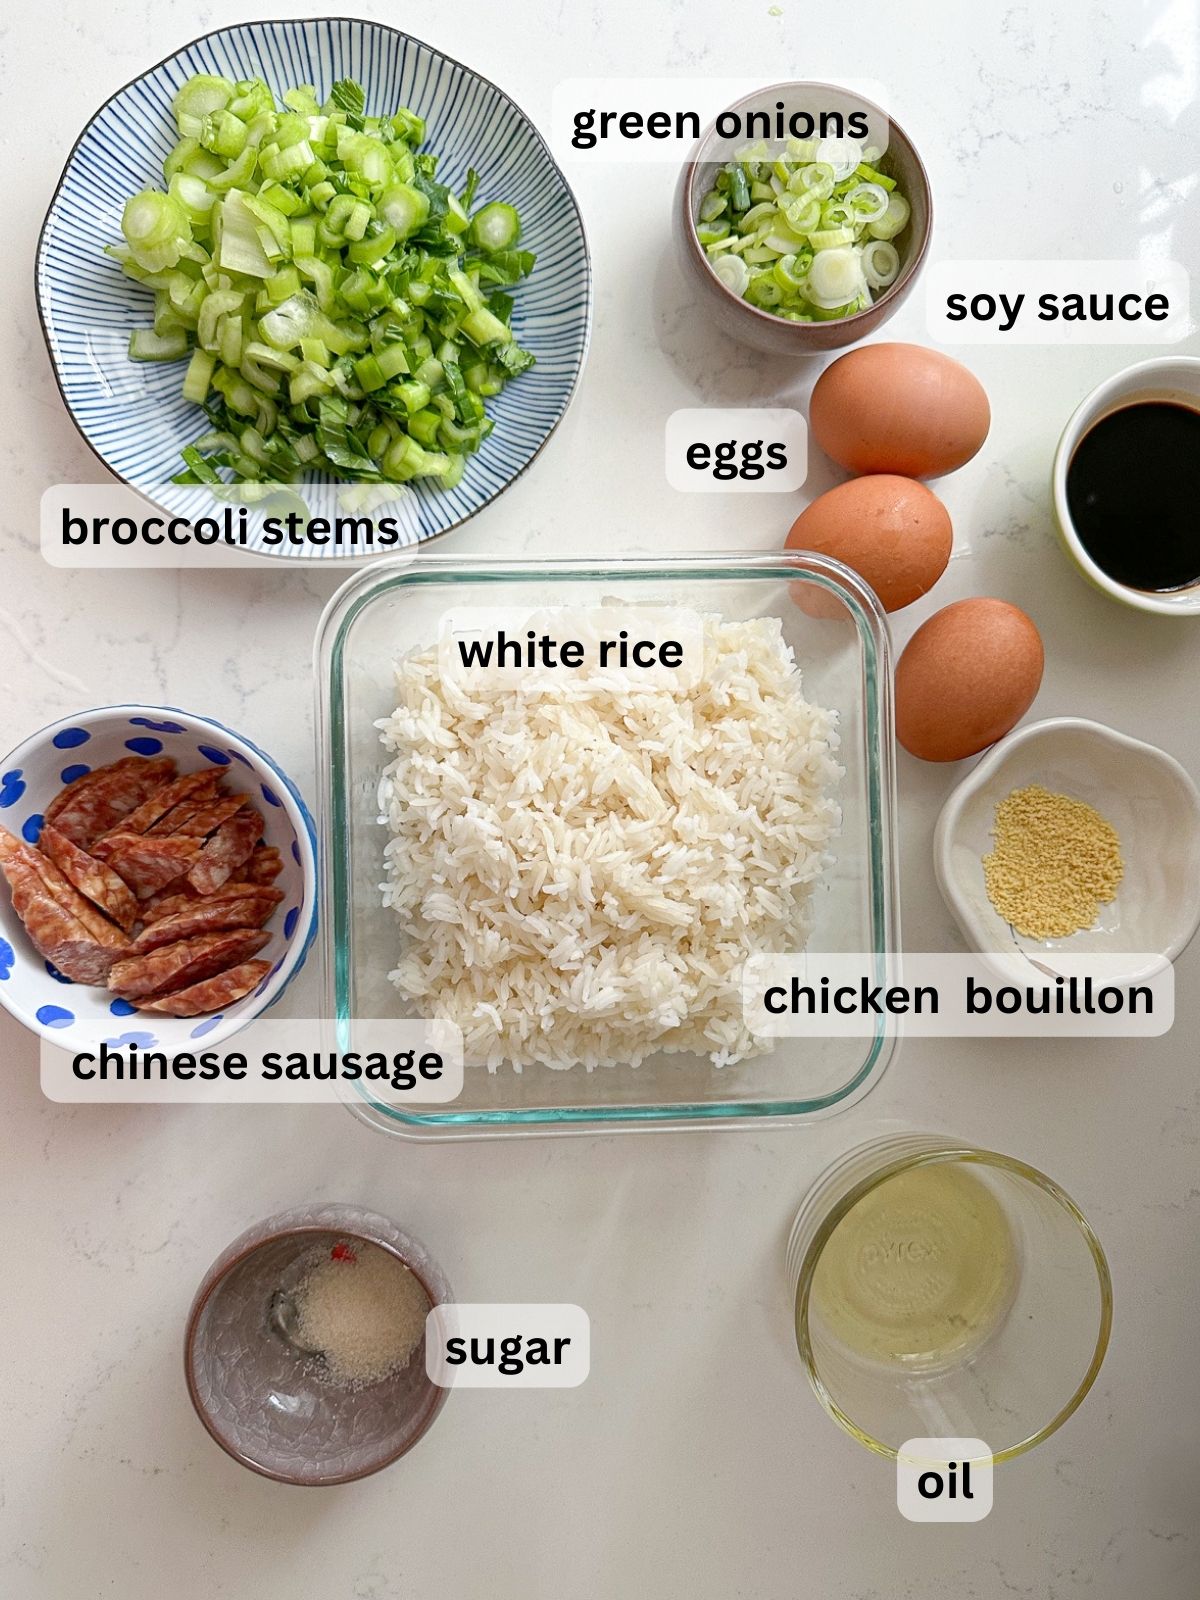 Ingredients to make golden fried rice include broccoli stems, white rice, eggs, green onions, soy sauce, chinese sausage chicken bouillon, oil, and sugar on the table with text labels.